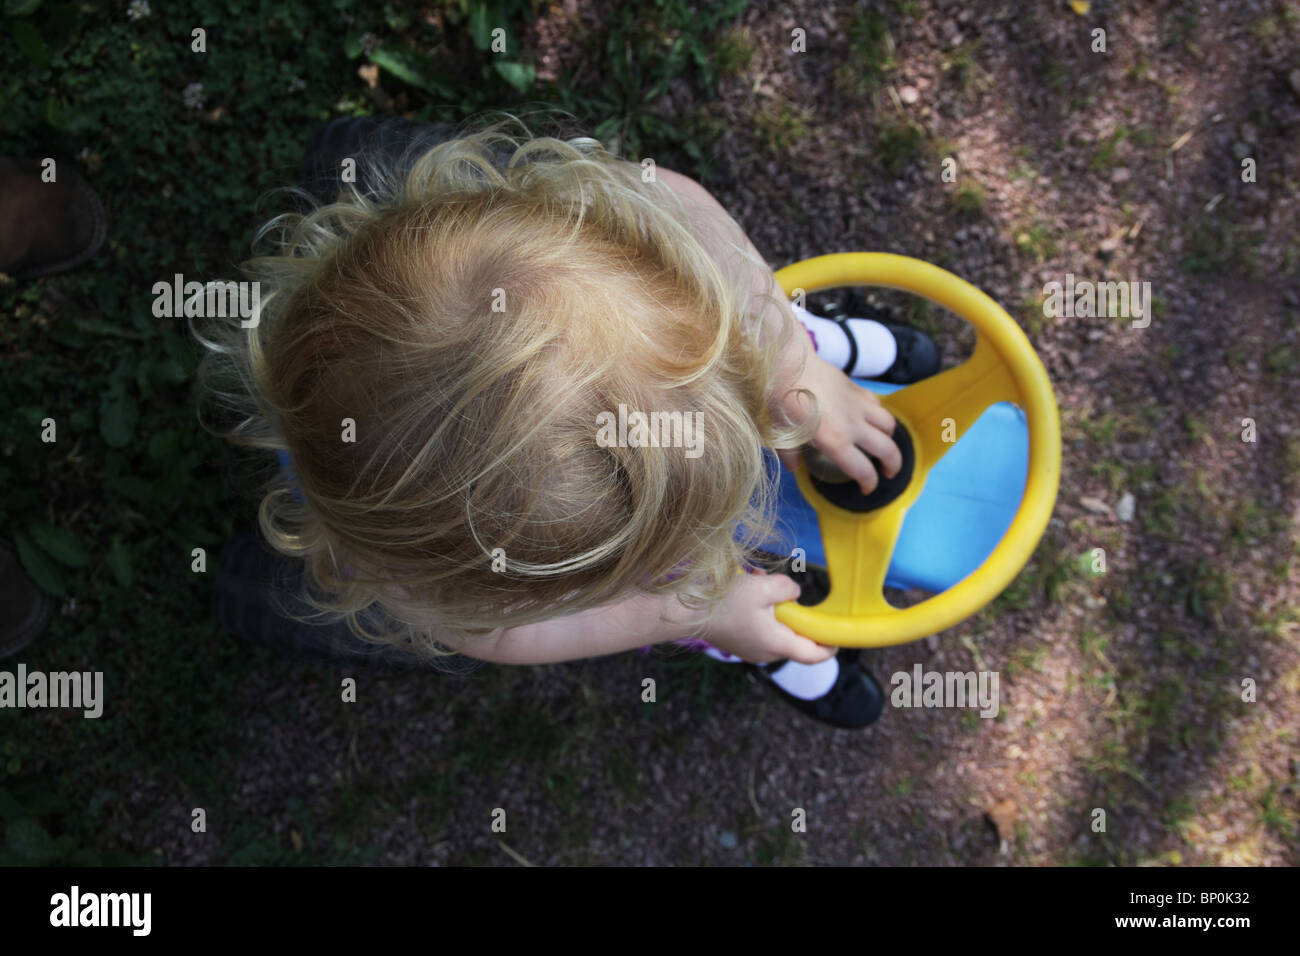 Little girl toddler in sitting on a plastic toy tractor holding the steering wheel aerial view MODEL RELEASED Stock Photo